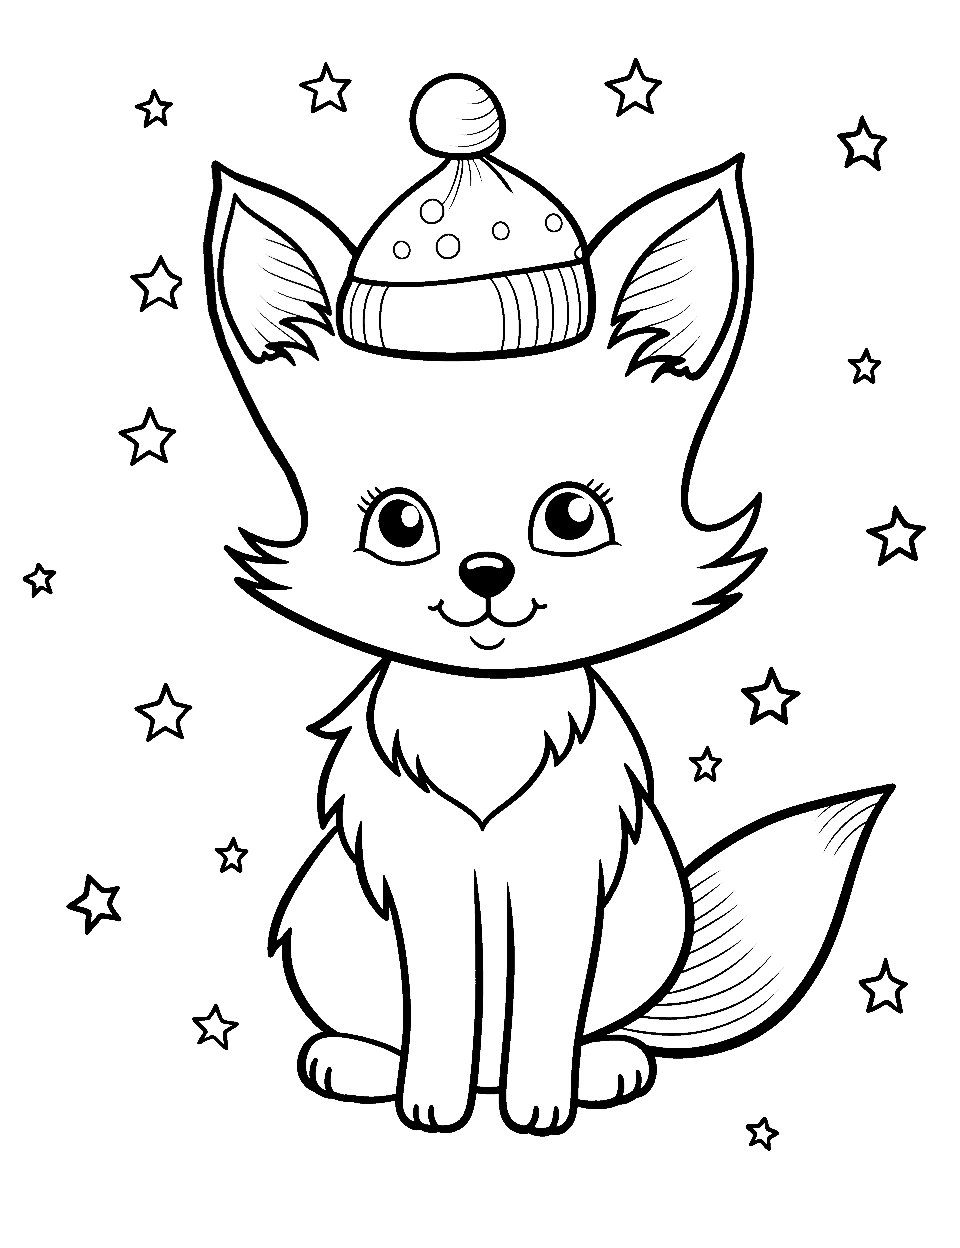 Christmas Fox Celebration Coloring Page - A jolly fox wearing a winter hat.